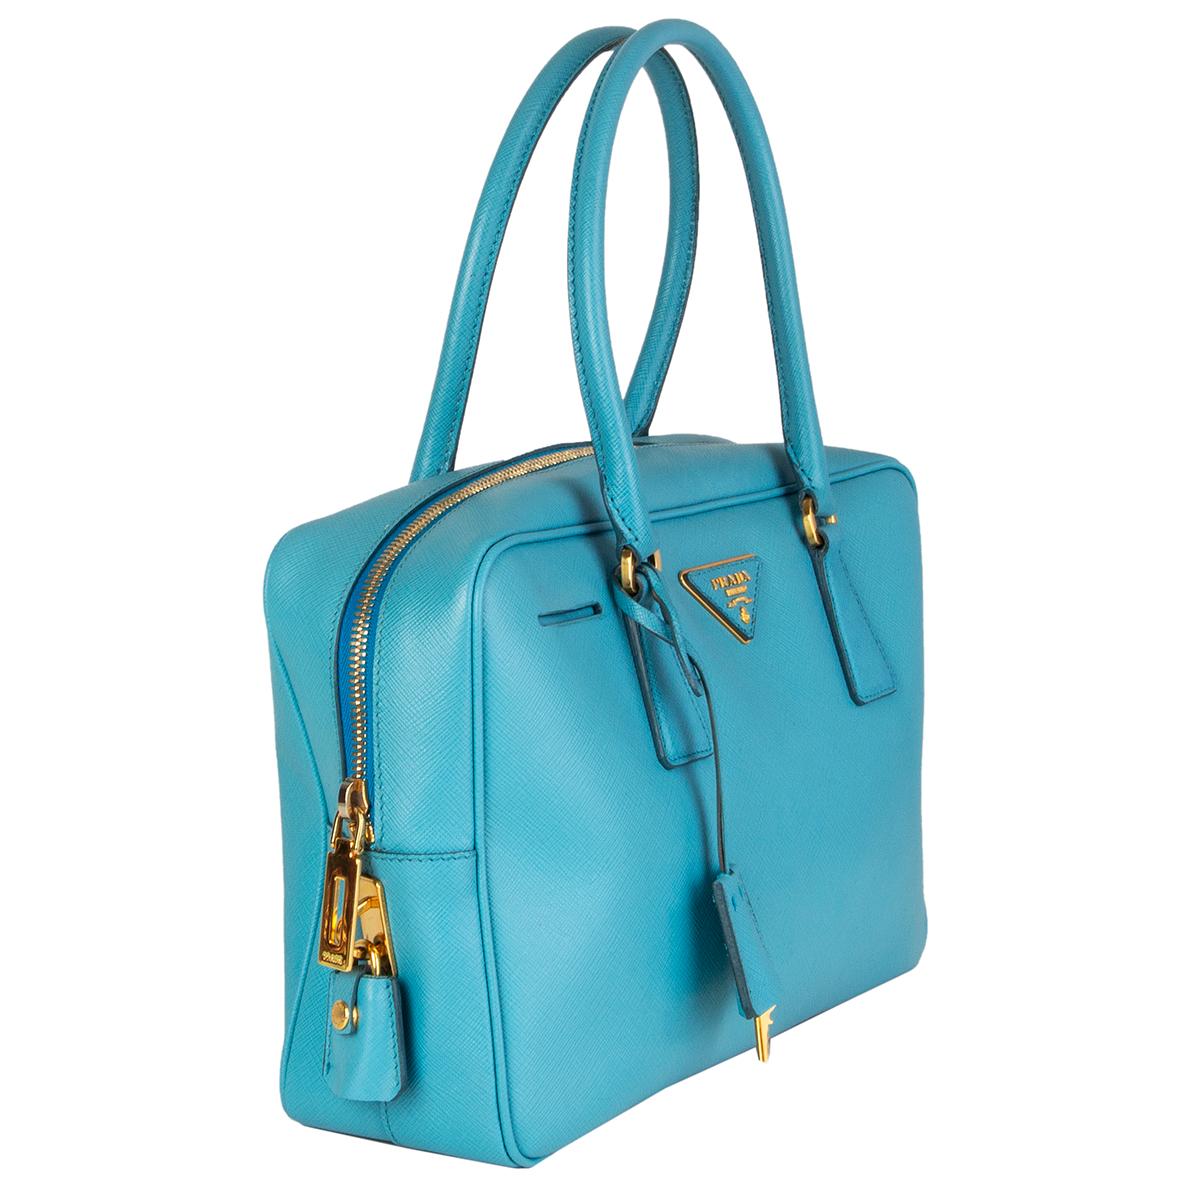 Prada 'Scarlatto BL0095' bag in voyage (light blue) Saffiano Lux leather featuring gold-tone hardware. Opens with a zipper on top and is lined in blue monogram canvas with one zipper pocket against the back. Has been carried with shadow